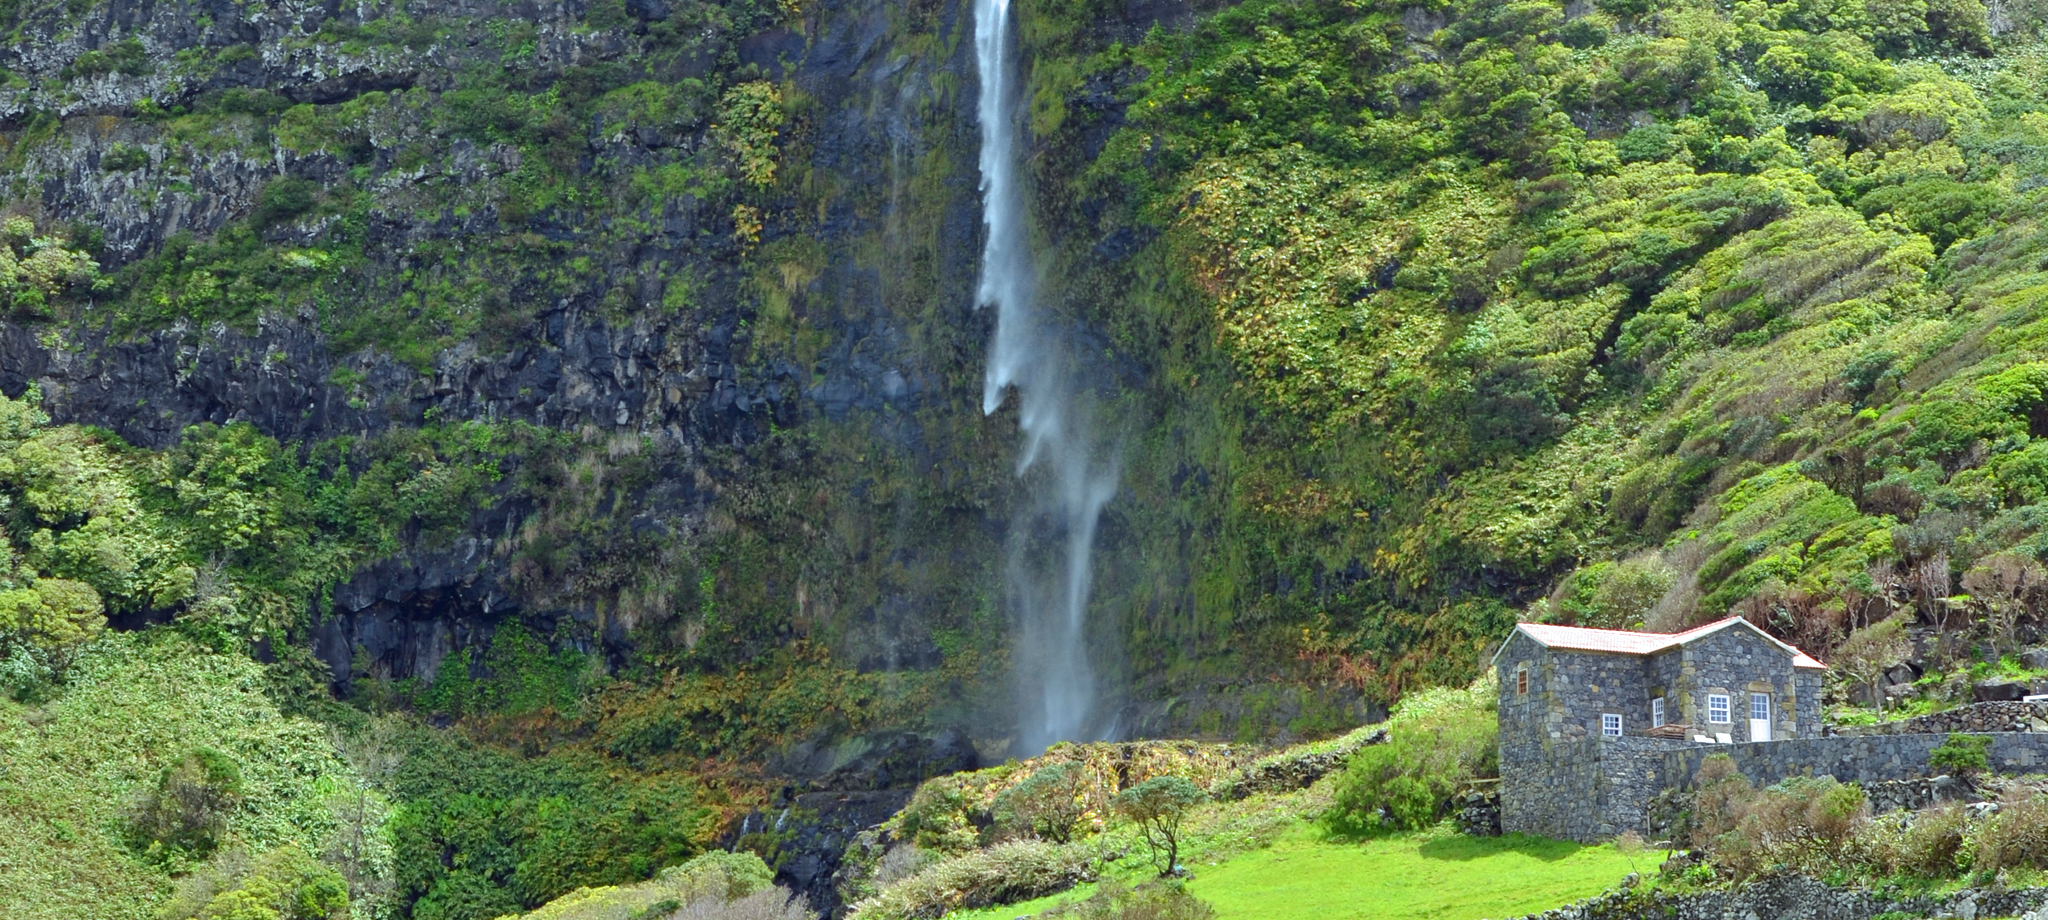 Package Tours to the Azores Islands - Azores.com Travel and Tours